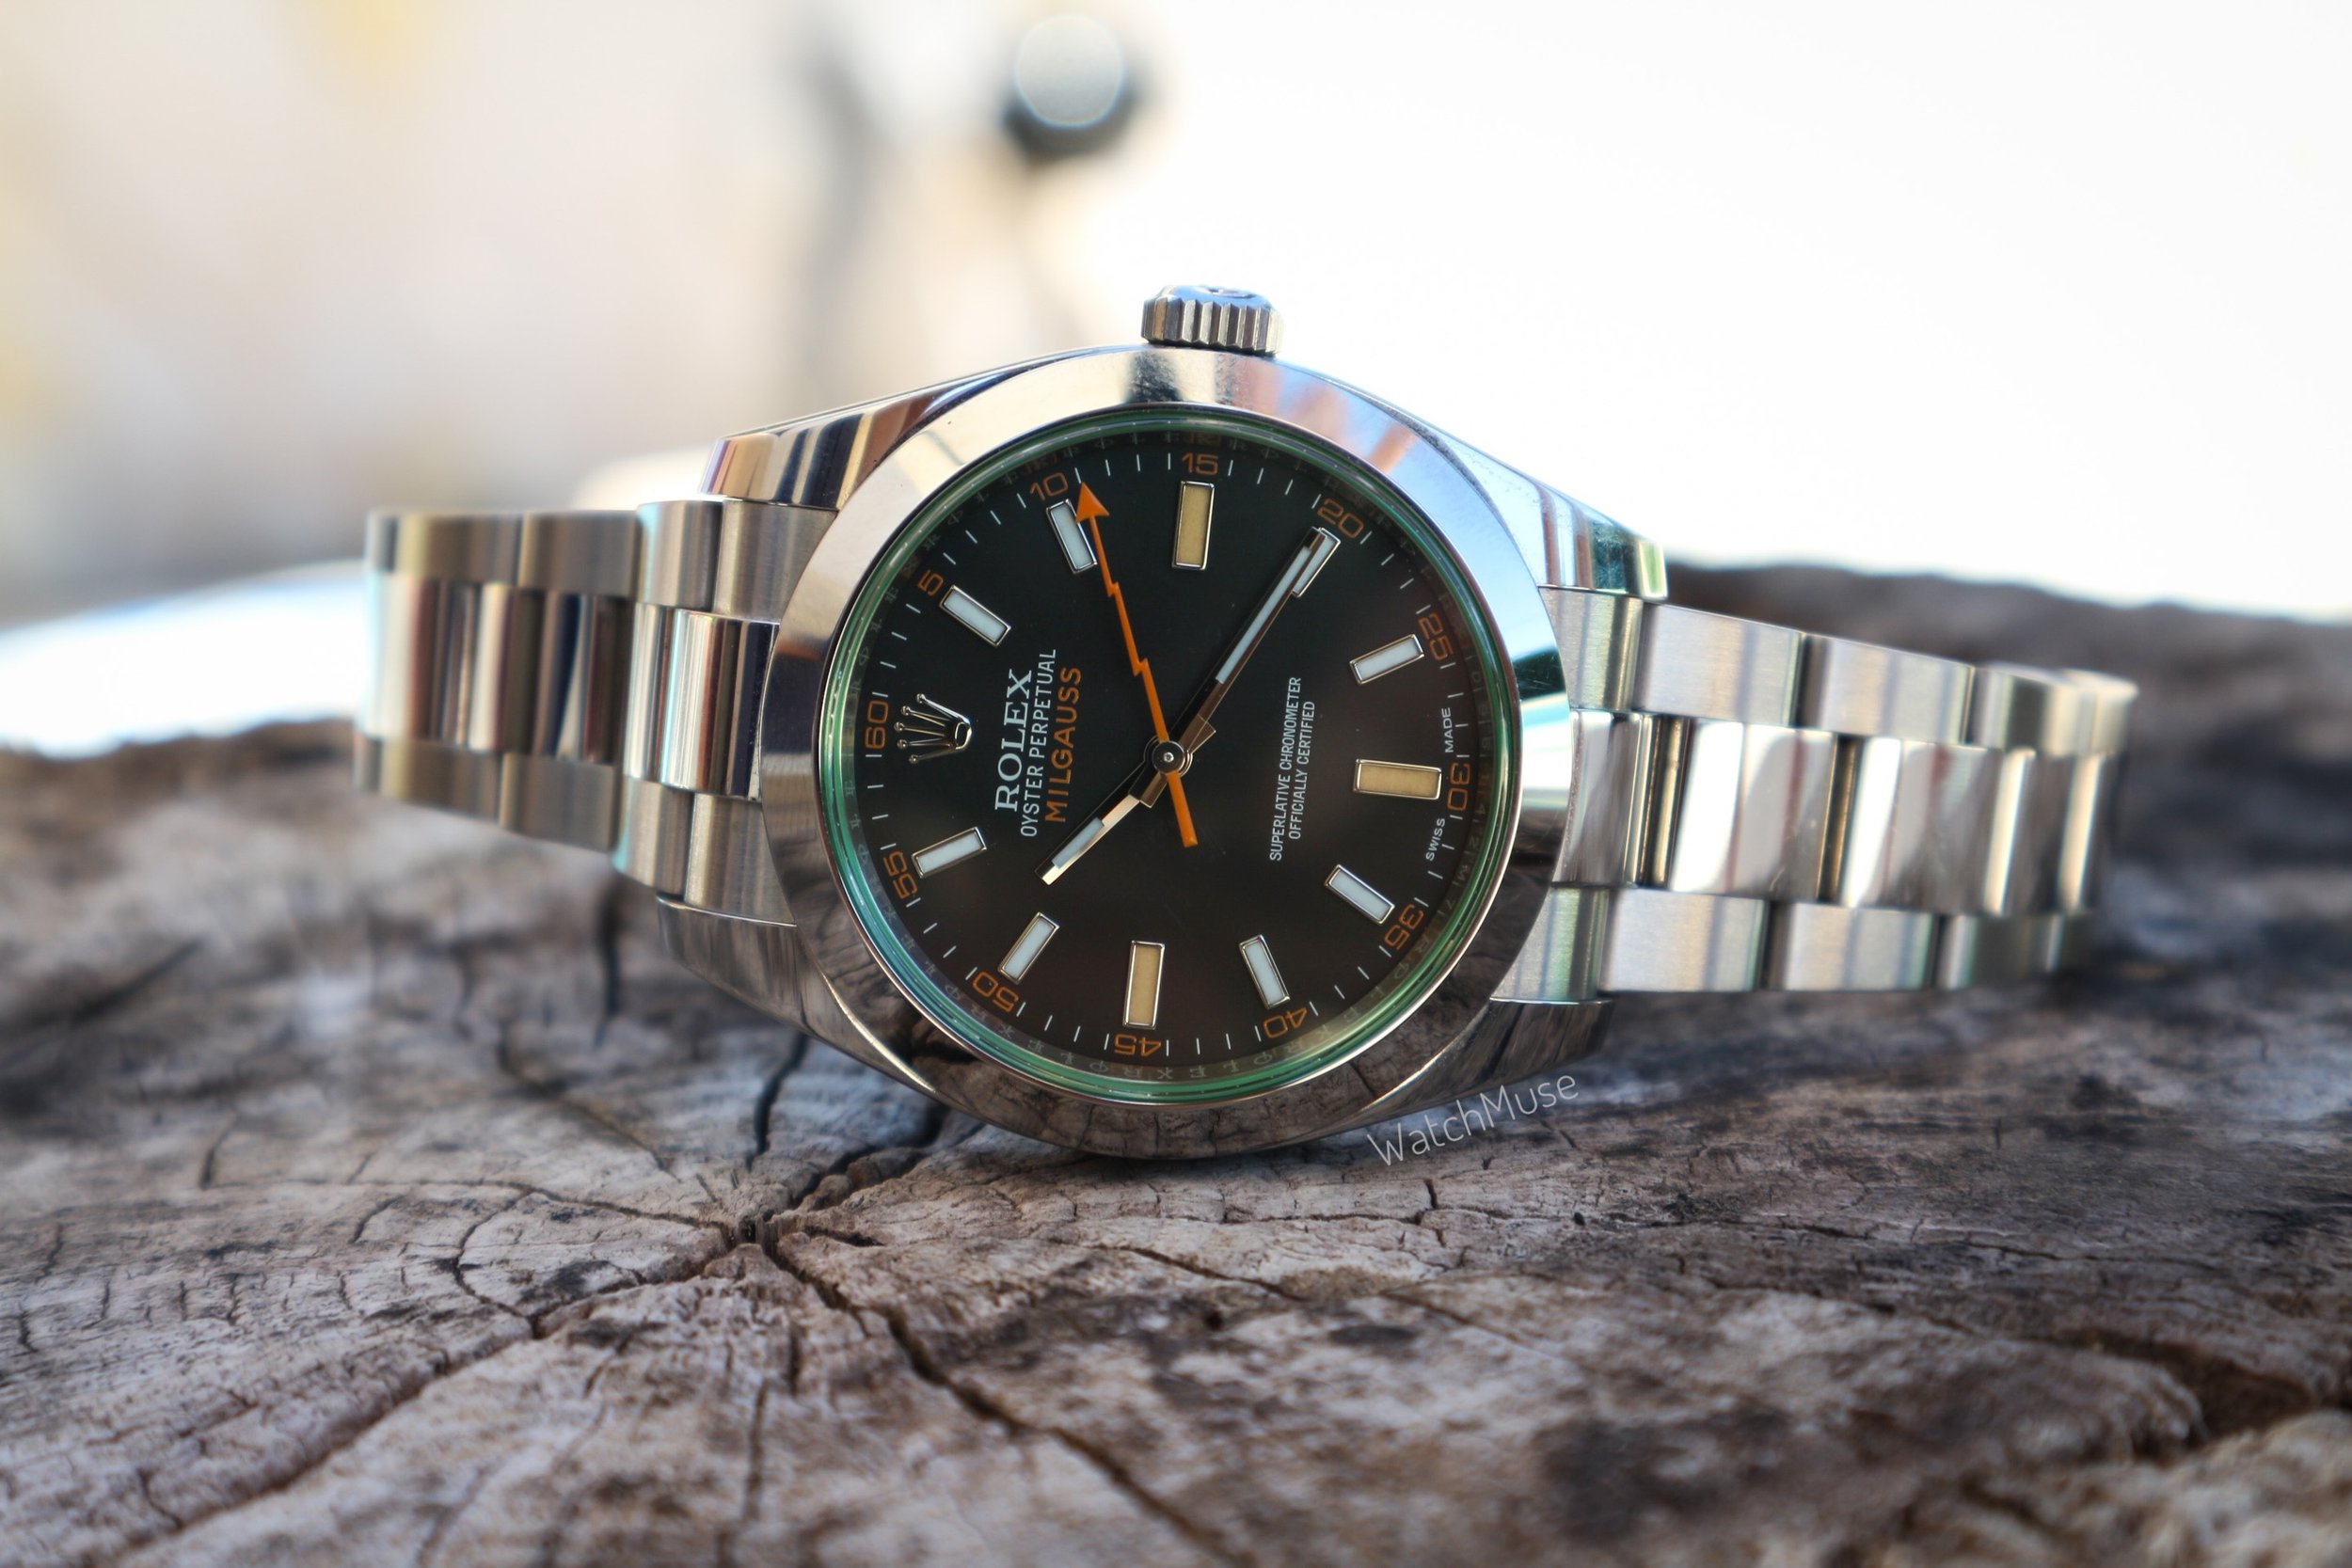 Rolex Milgauss Review - The Underrated Rolex? —